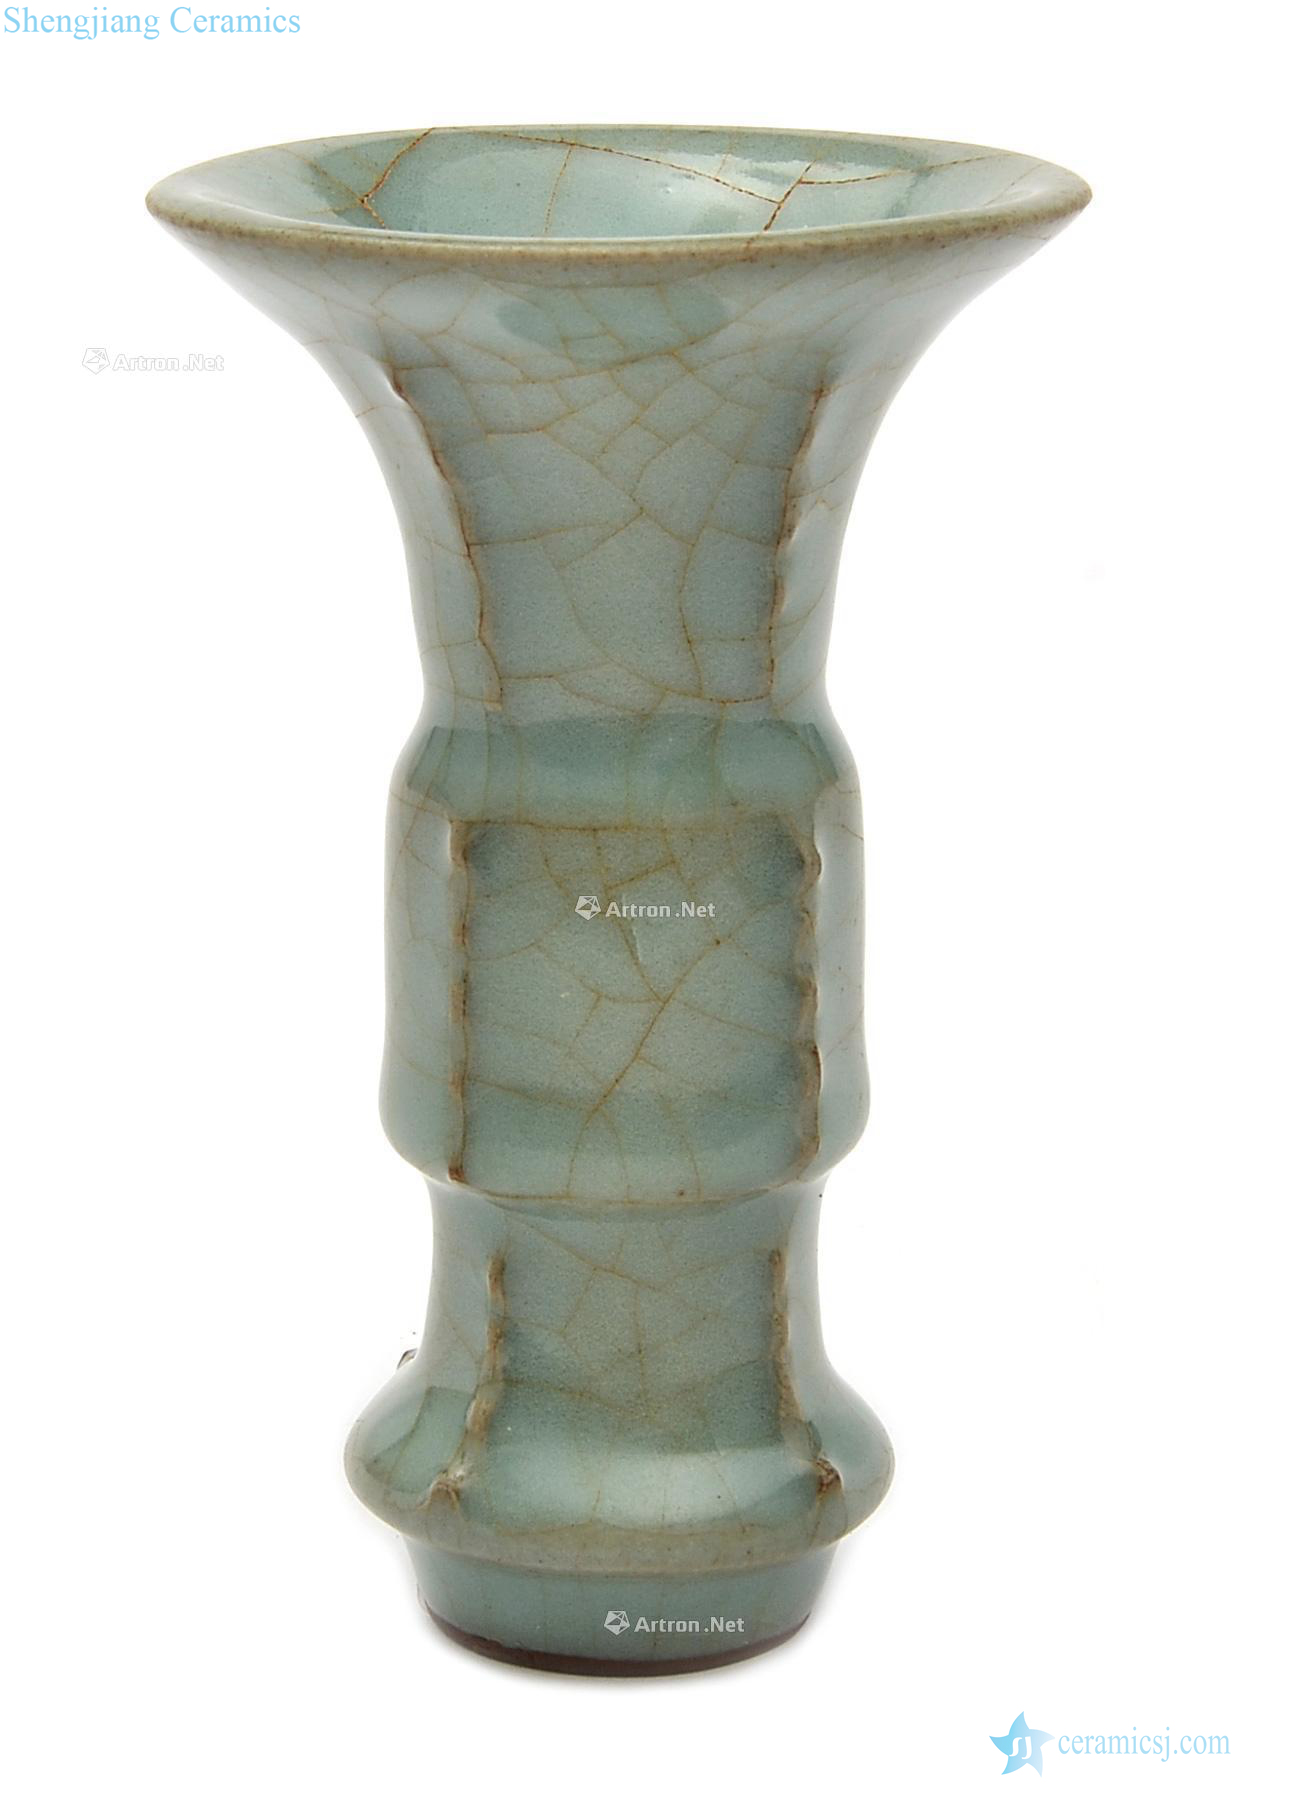 The song dynasty Kiln halberd ear vase with flowers